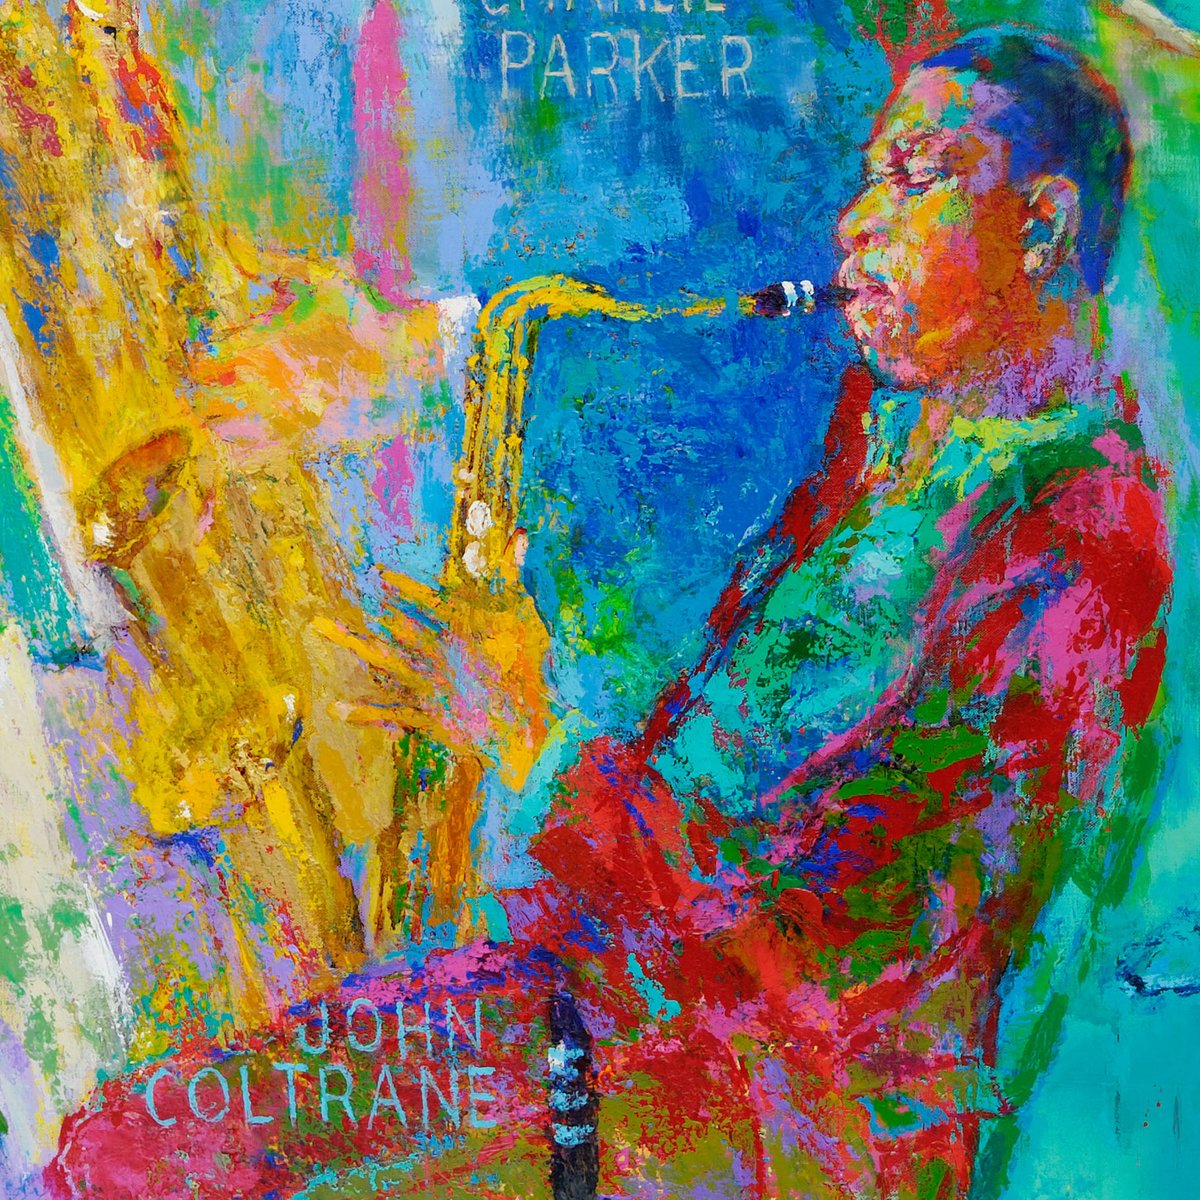 In a #JohnColtrane kinda mood today. This art's by #LeRoyNeiman